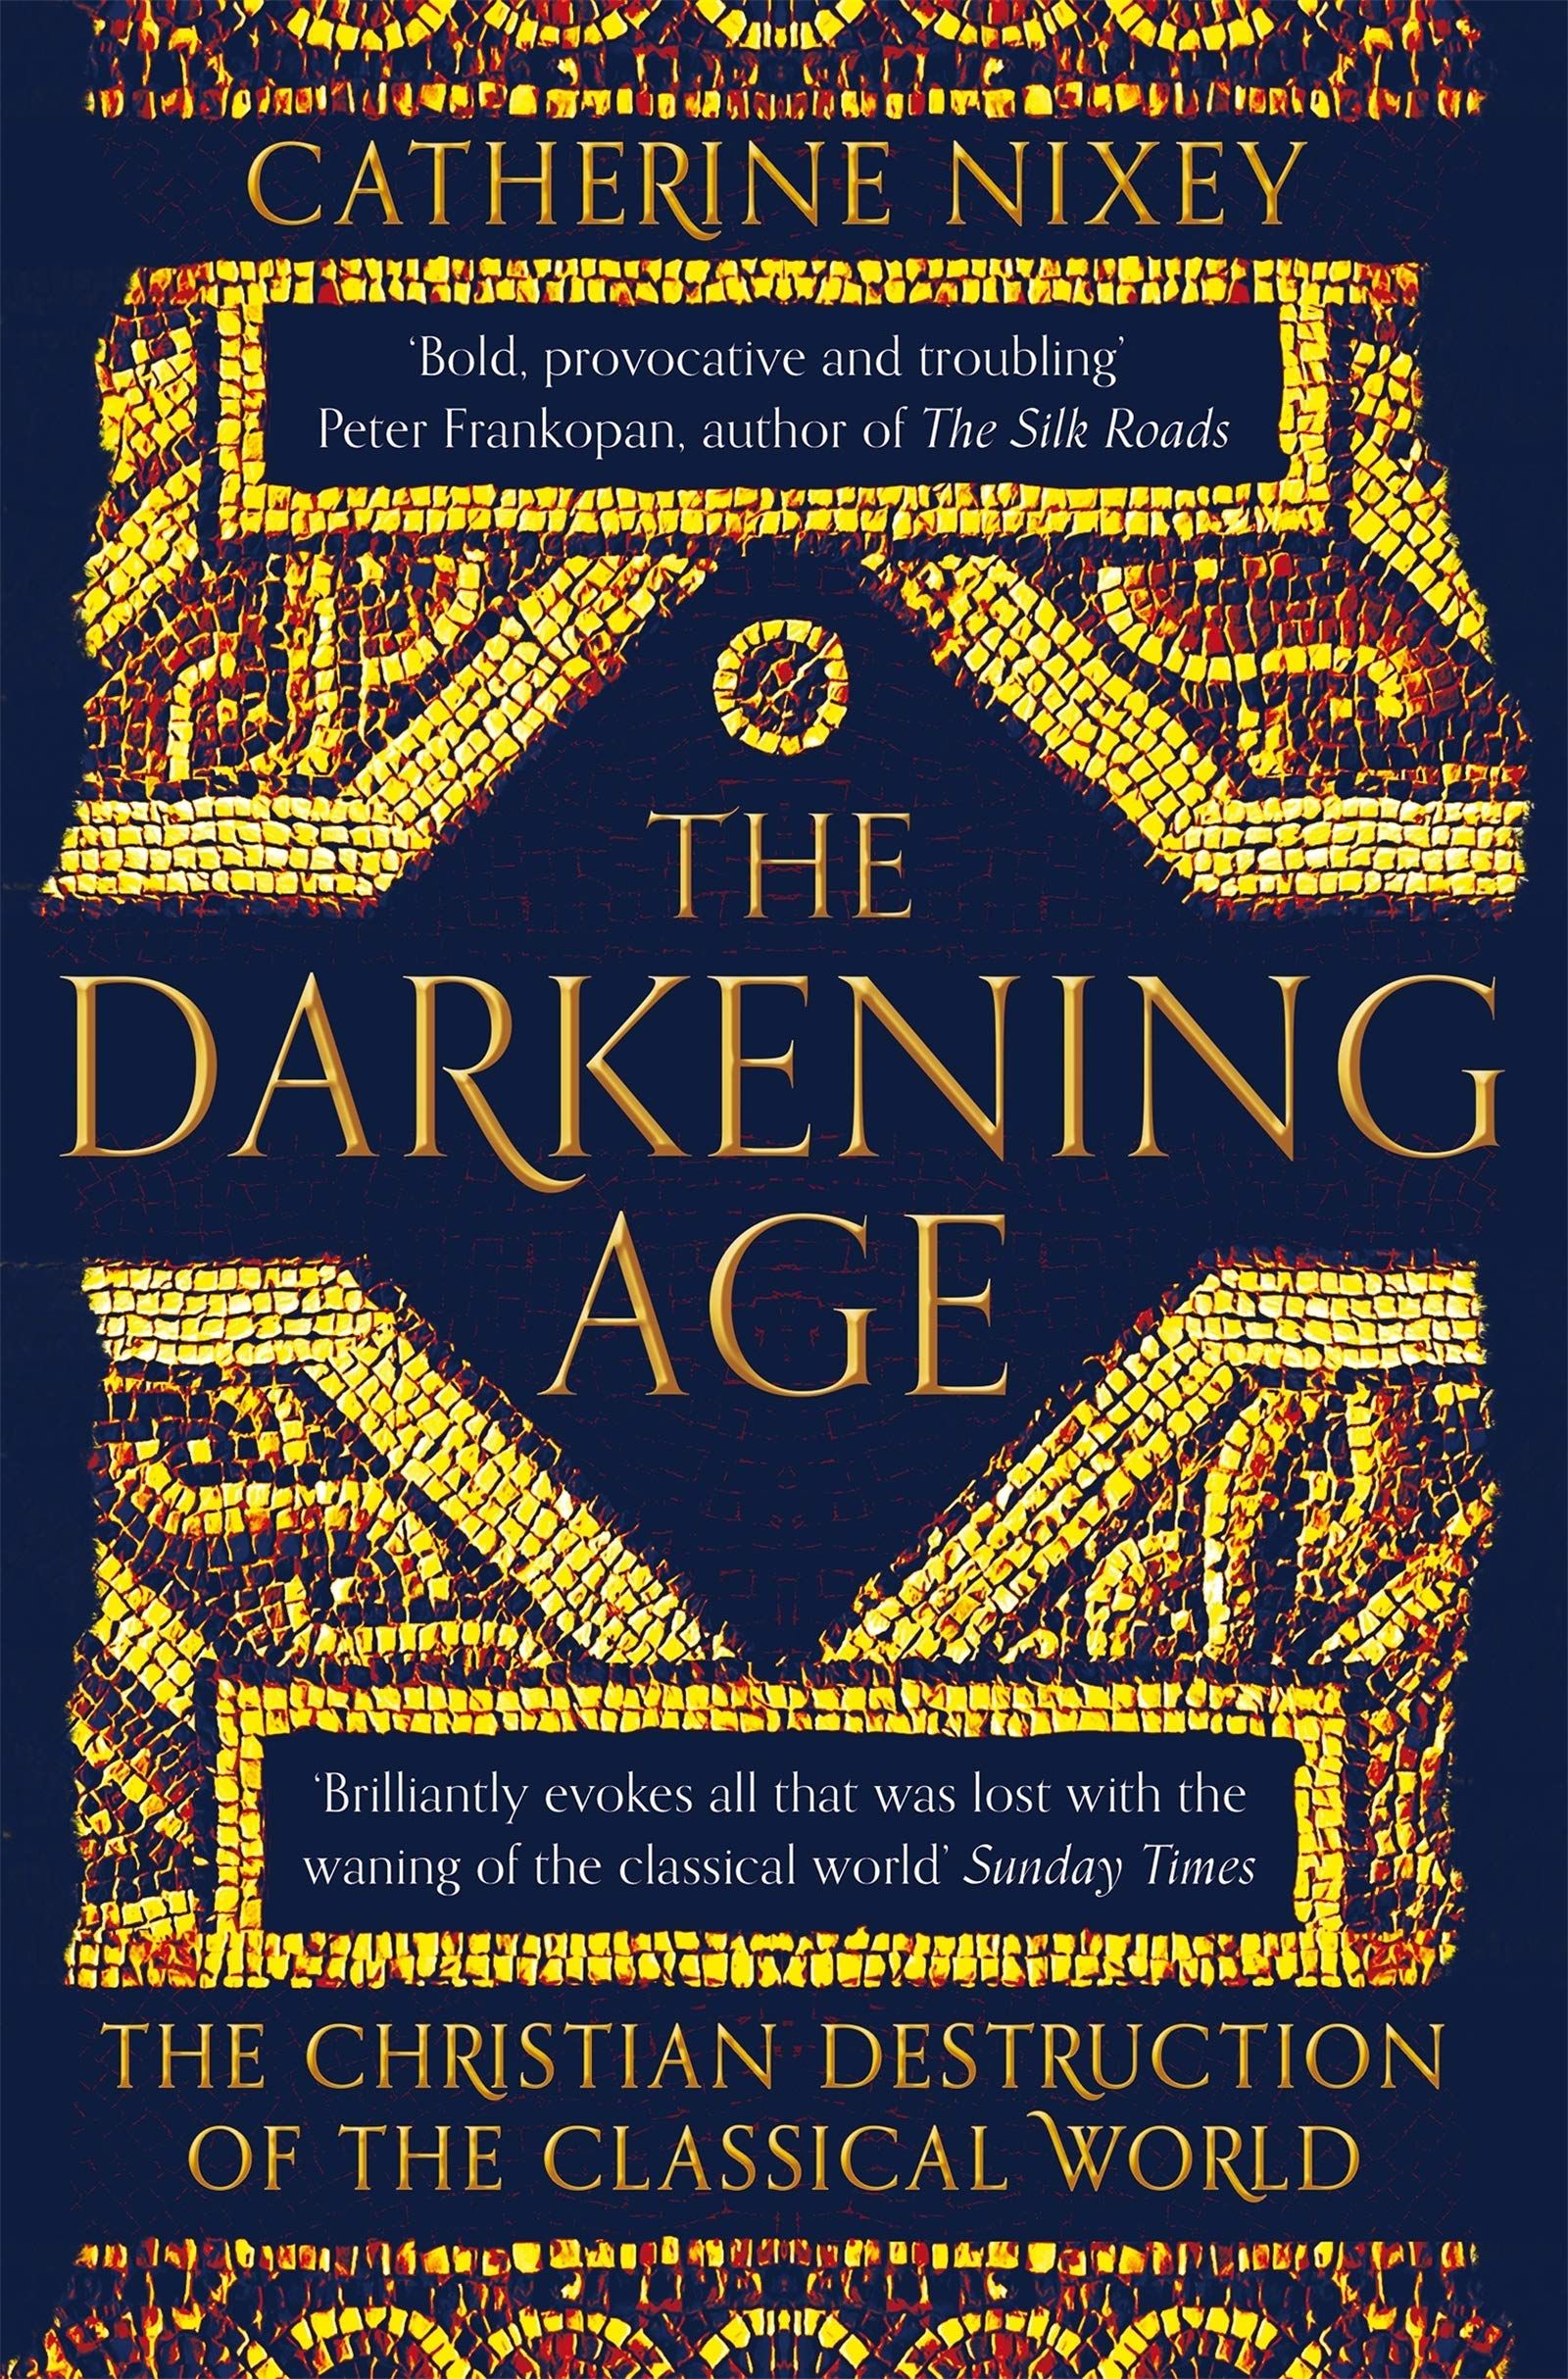 The Dark Ages cover